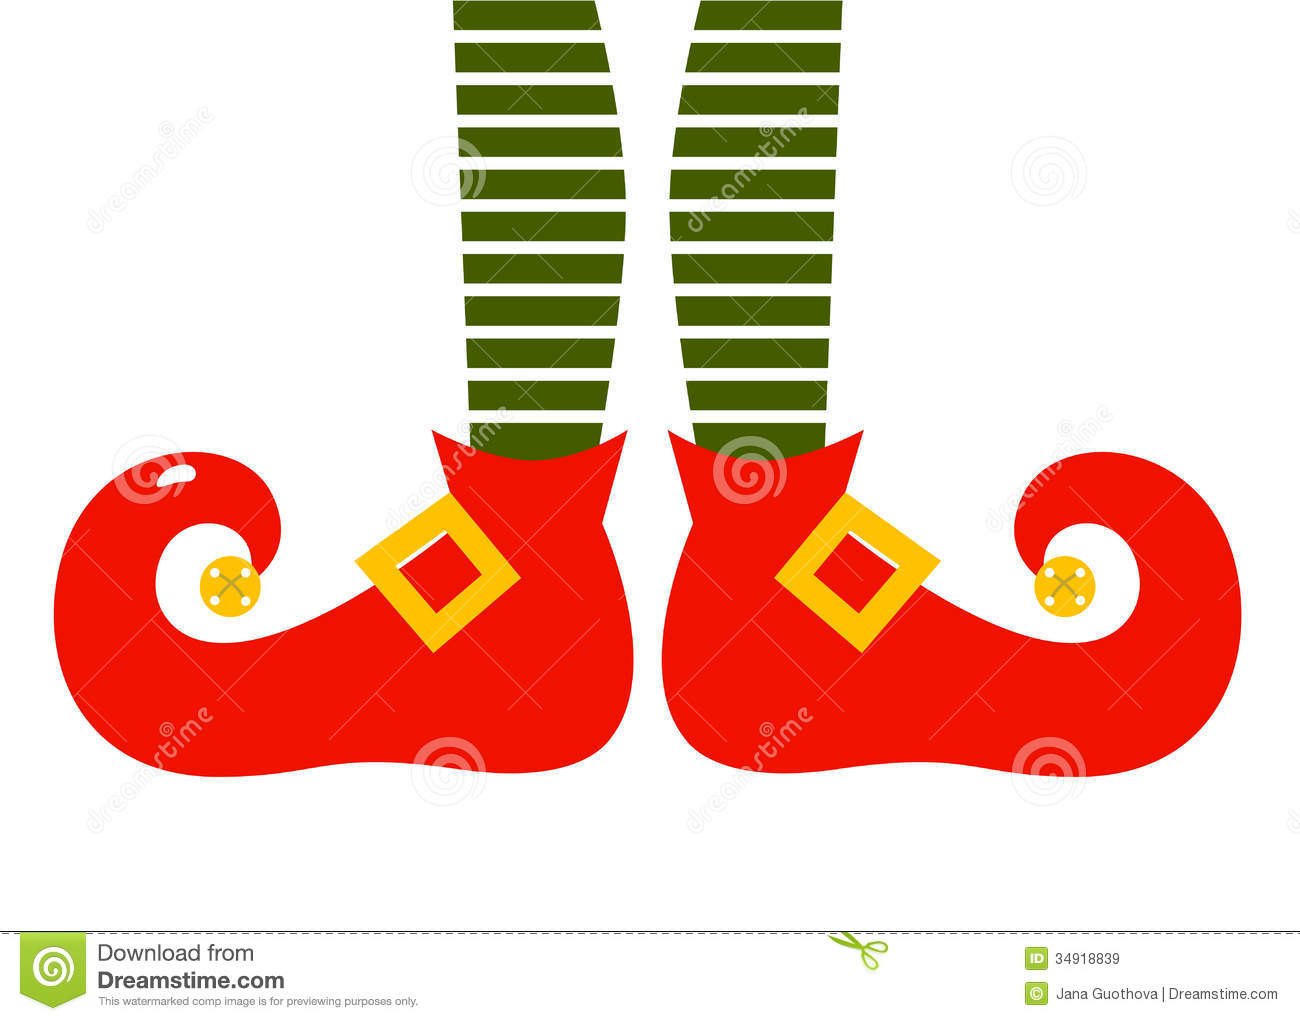 Free Christmas Slippers Cliparts, Download Free Clip Art